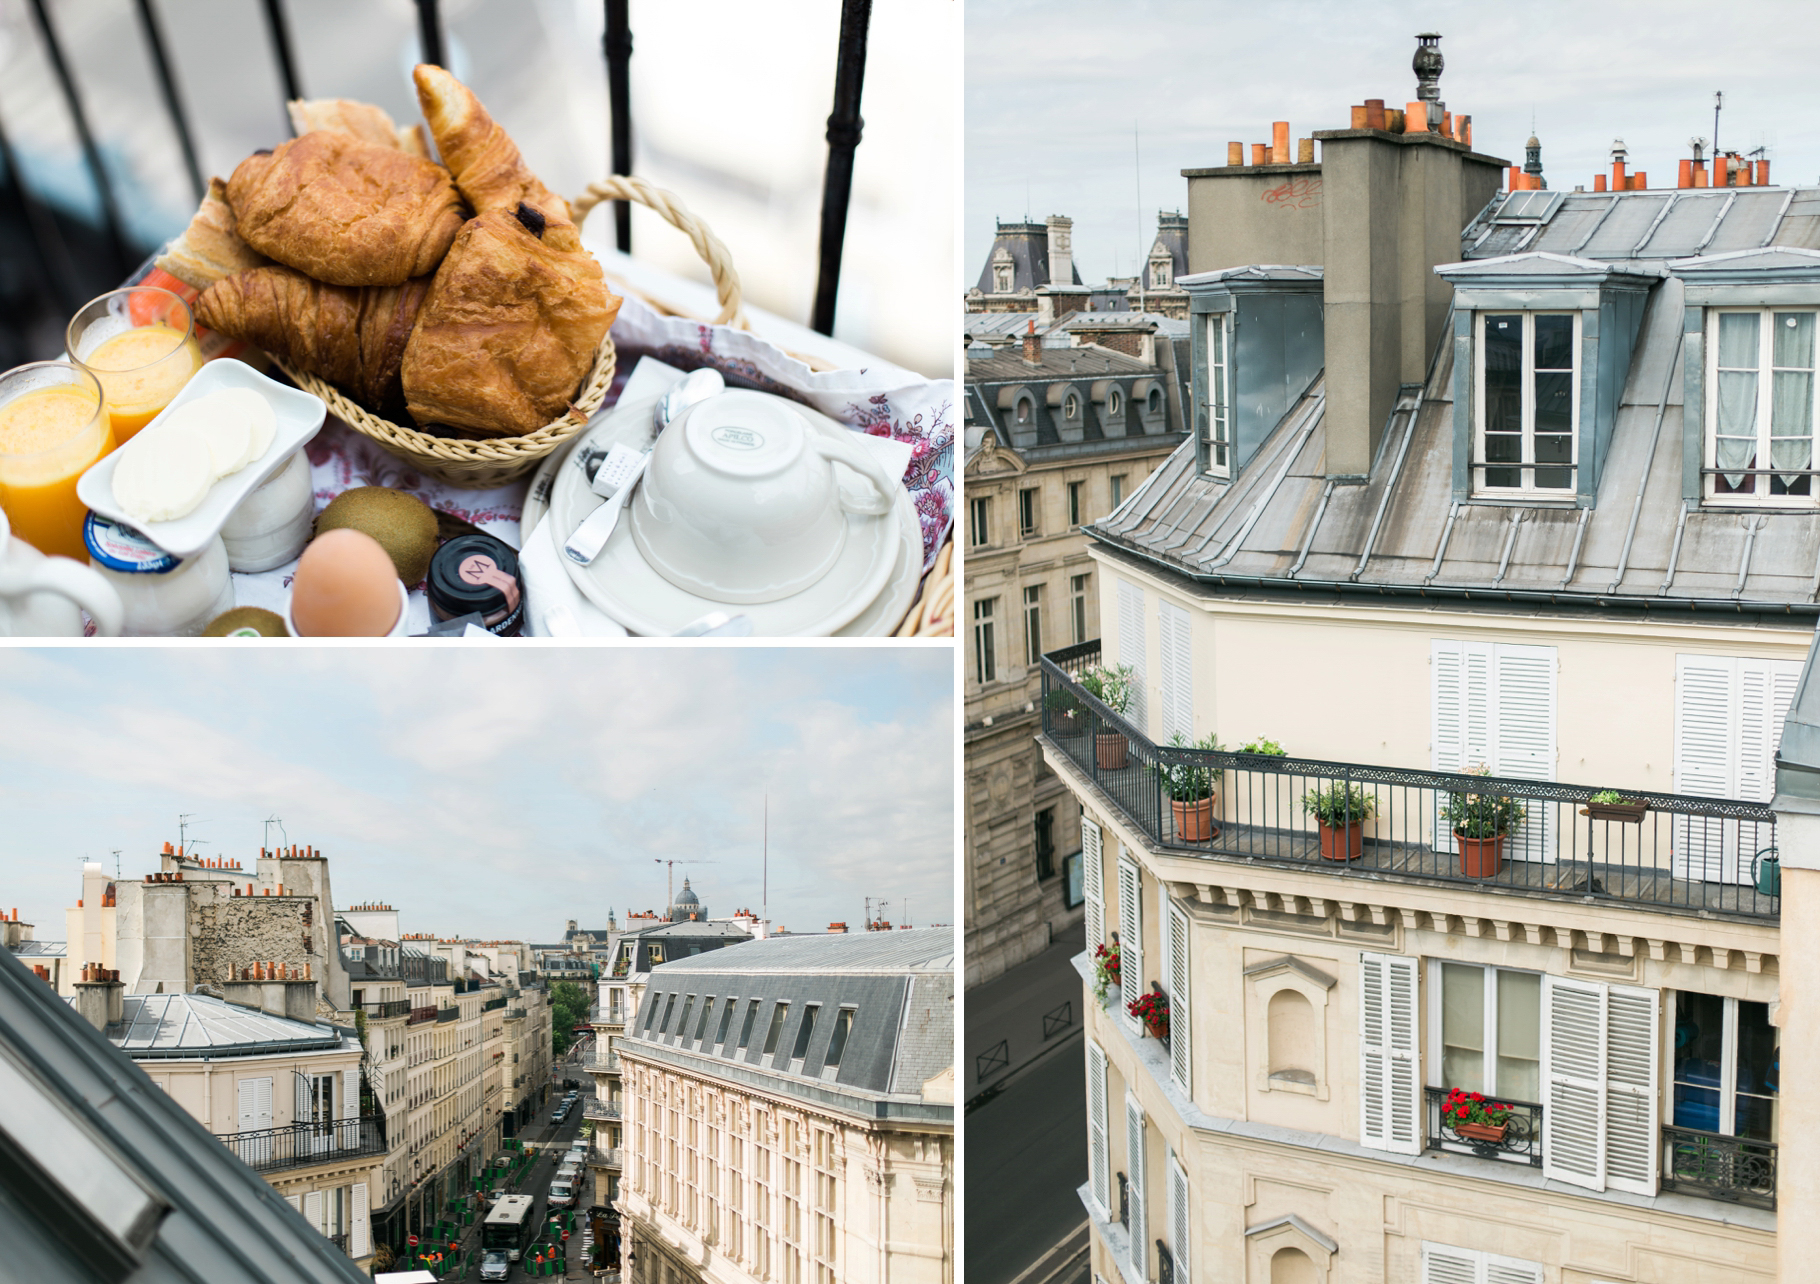 14-Rooftop-Croissant-Breakfast-Paris-France-Europe-Travel-Anniversary-Trip-Photography-by-Betty-Elaine